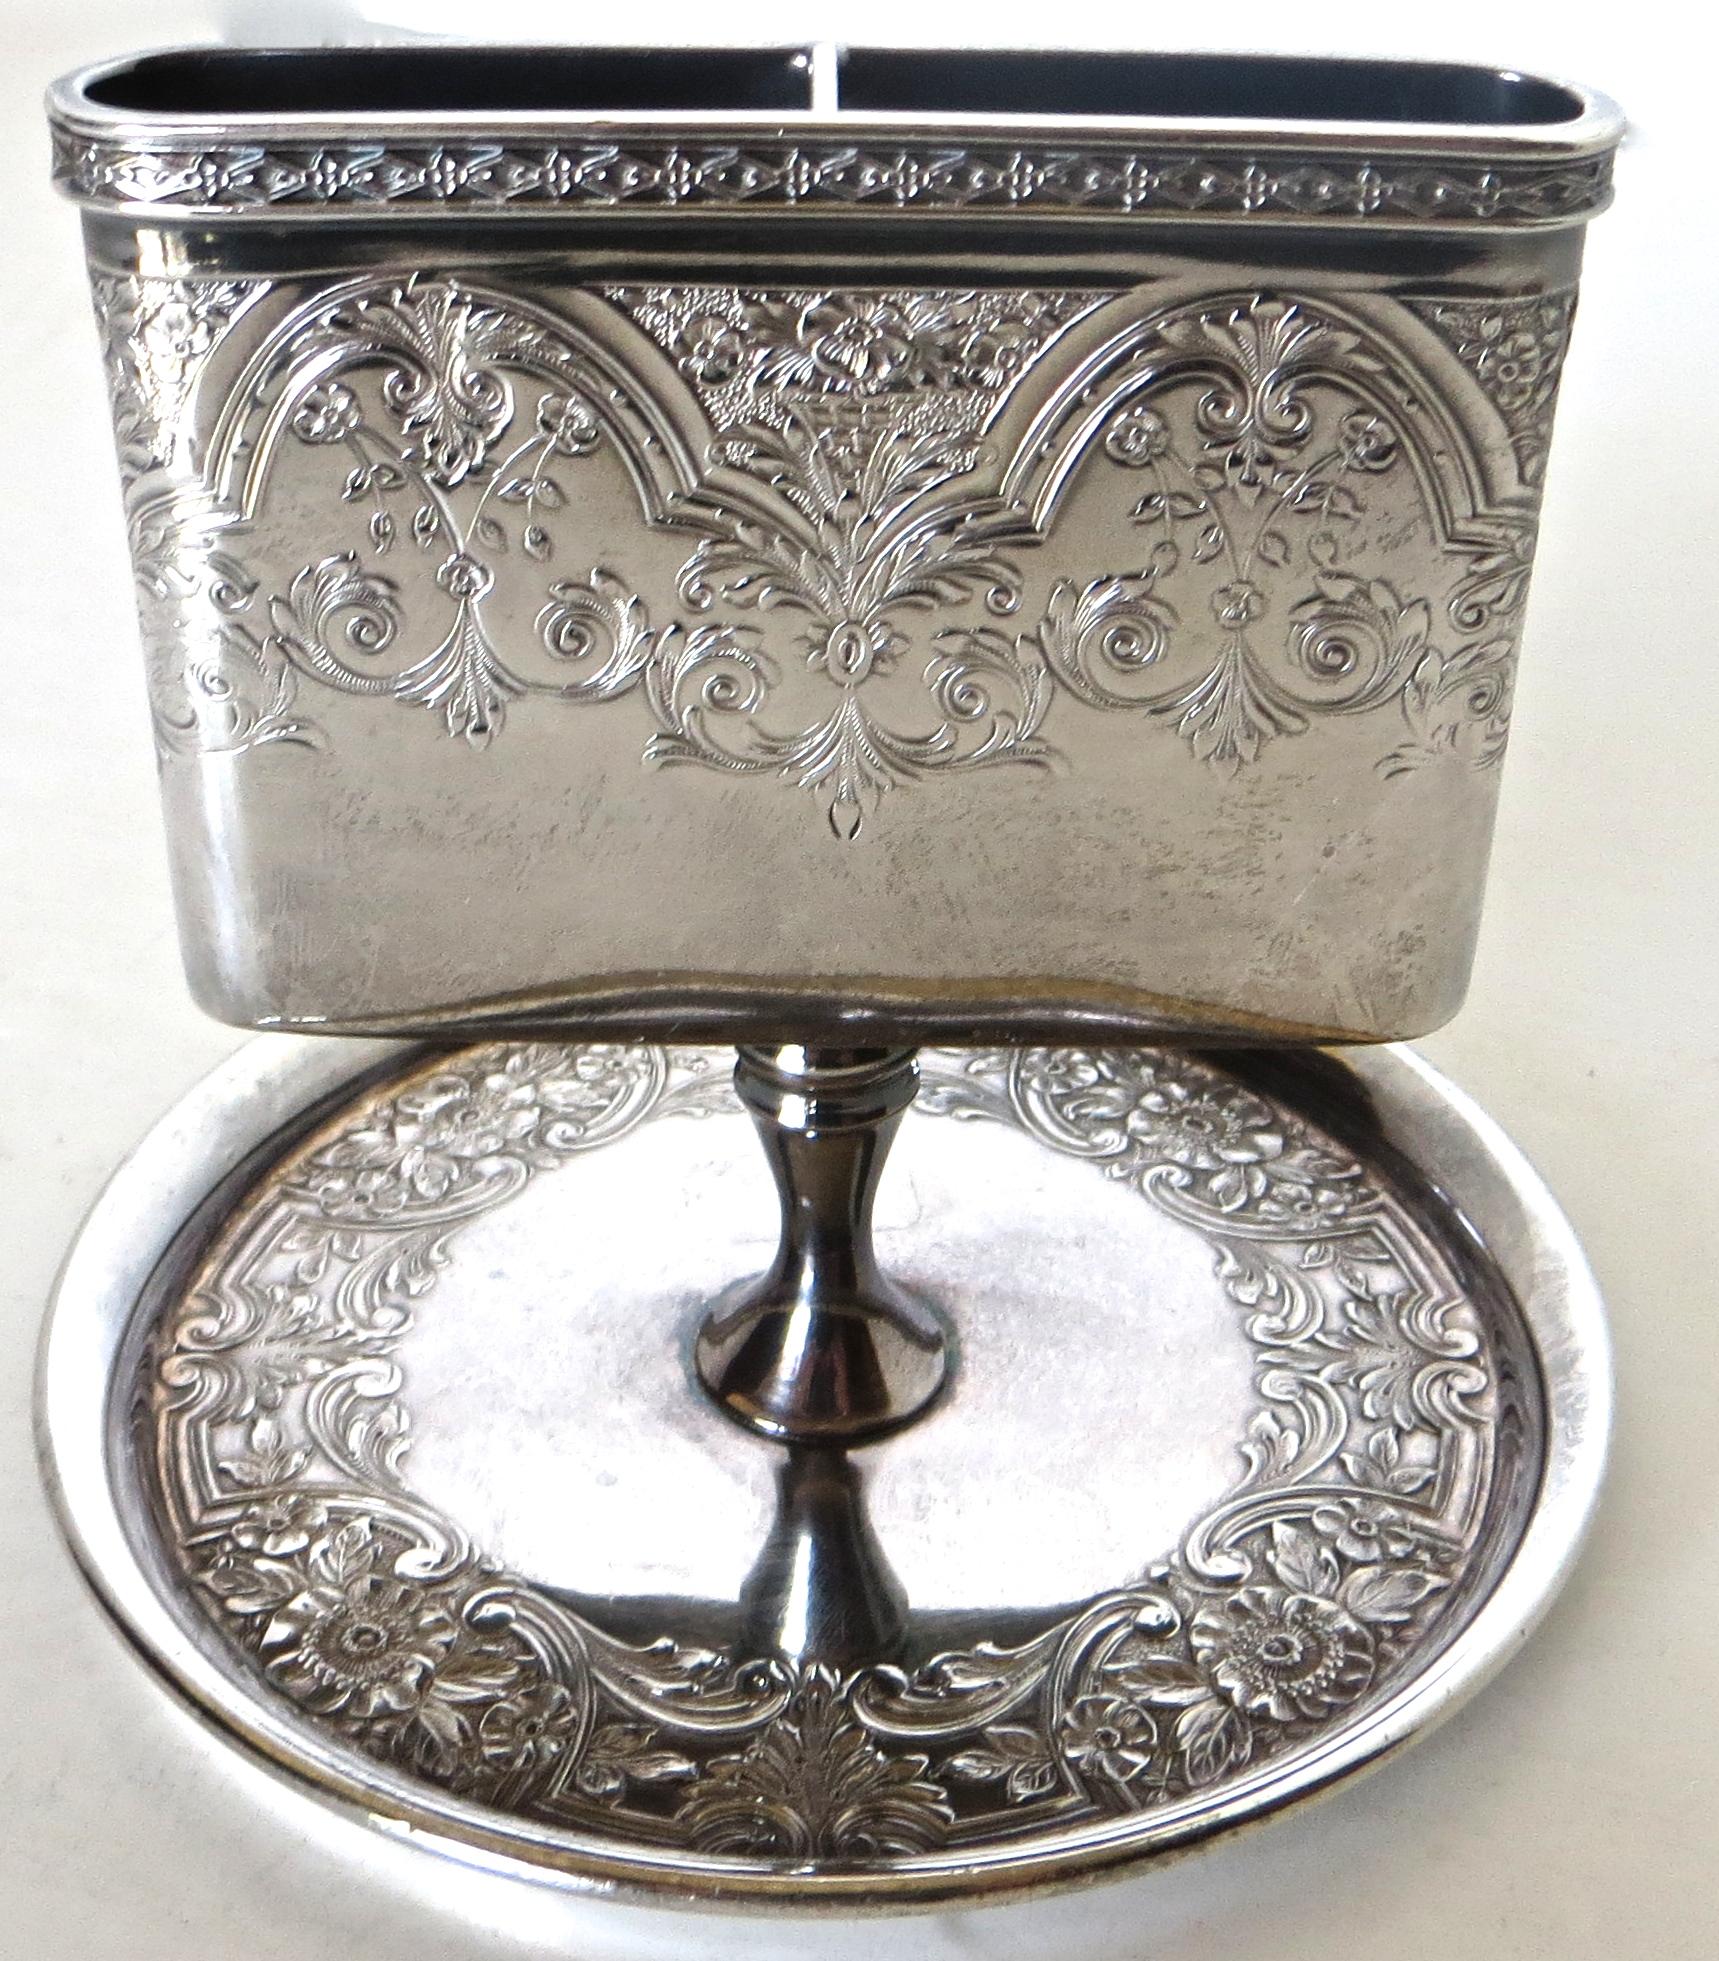 This Victorian match holder is highly decorated with etched floral design to both sides and wrapped completely around of the holder. An even more elaborate detailed etched floral pattern is applied to the waste receptacle circular dish below. The